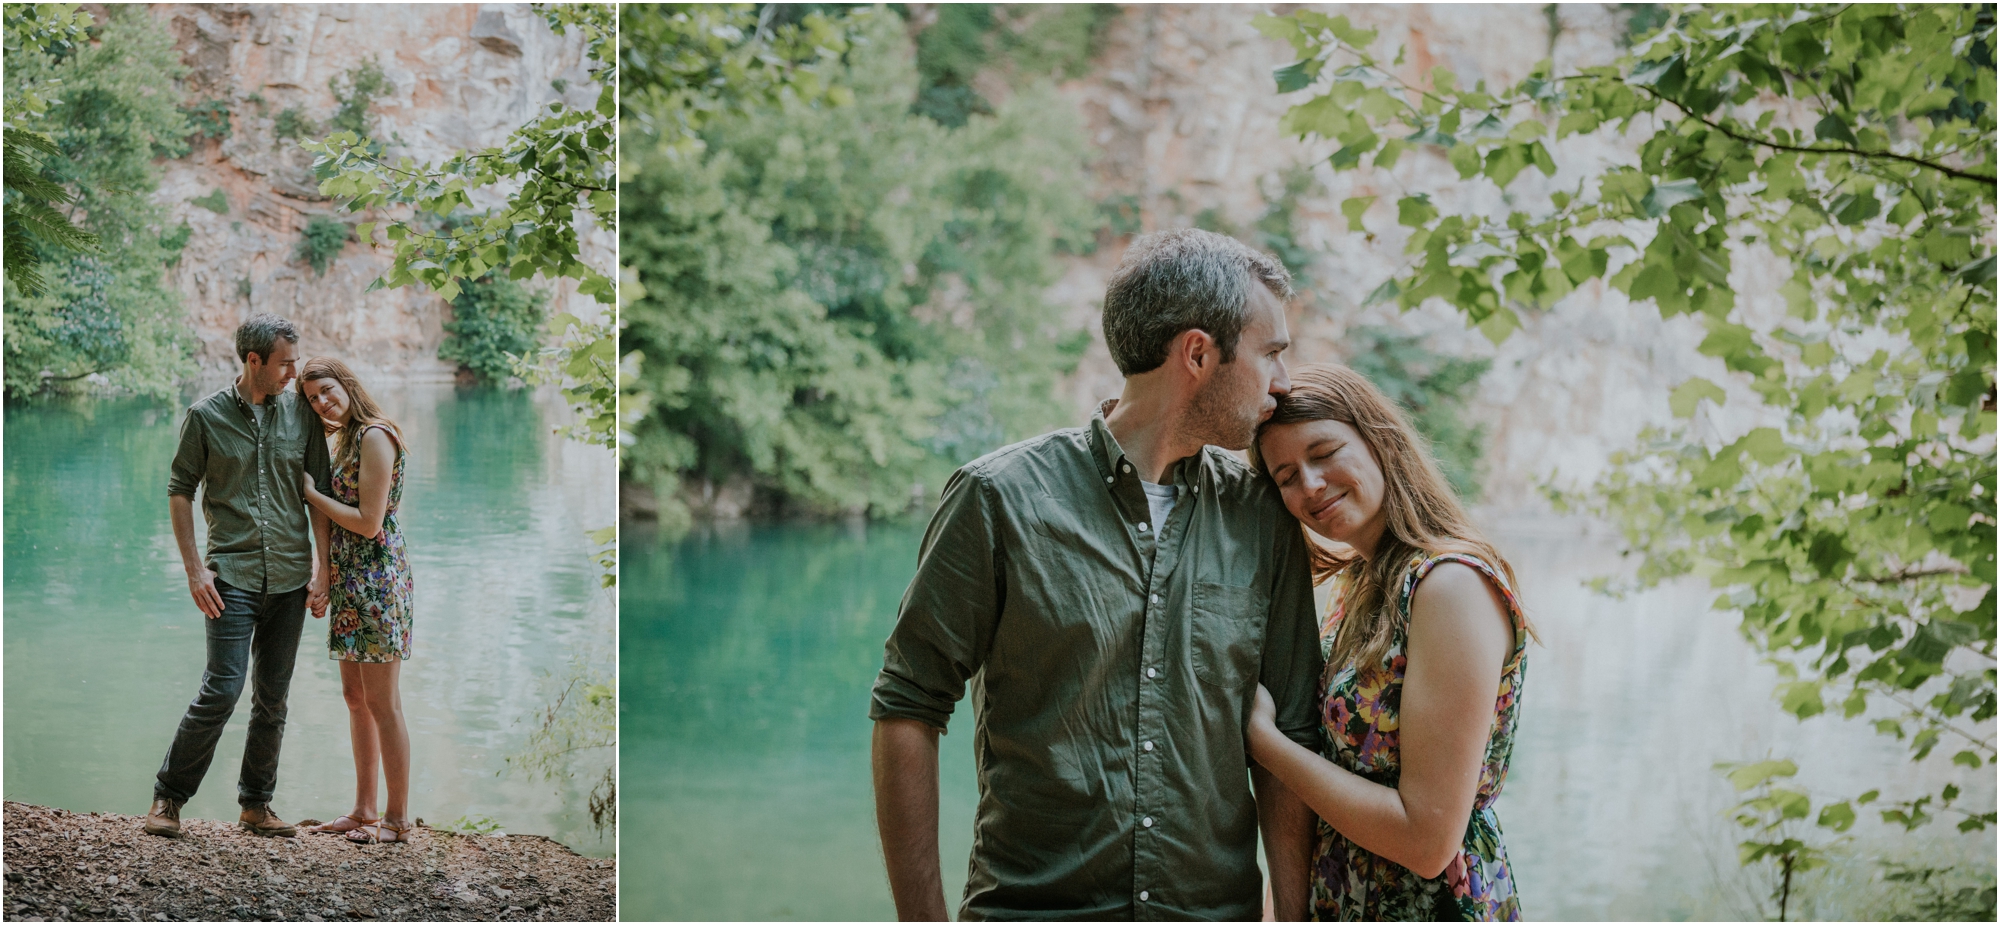 meads-quarry-ijams-nature-center-knoxville-tennessee-engagement-session-summer-northeast-tn-adventurous-outdoors-lake-katy-sergent_0024.jpg